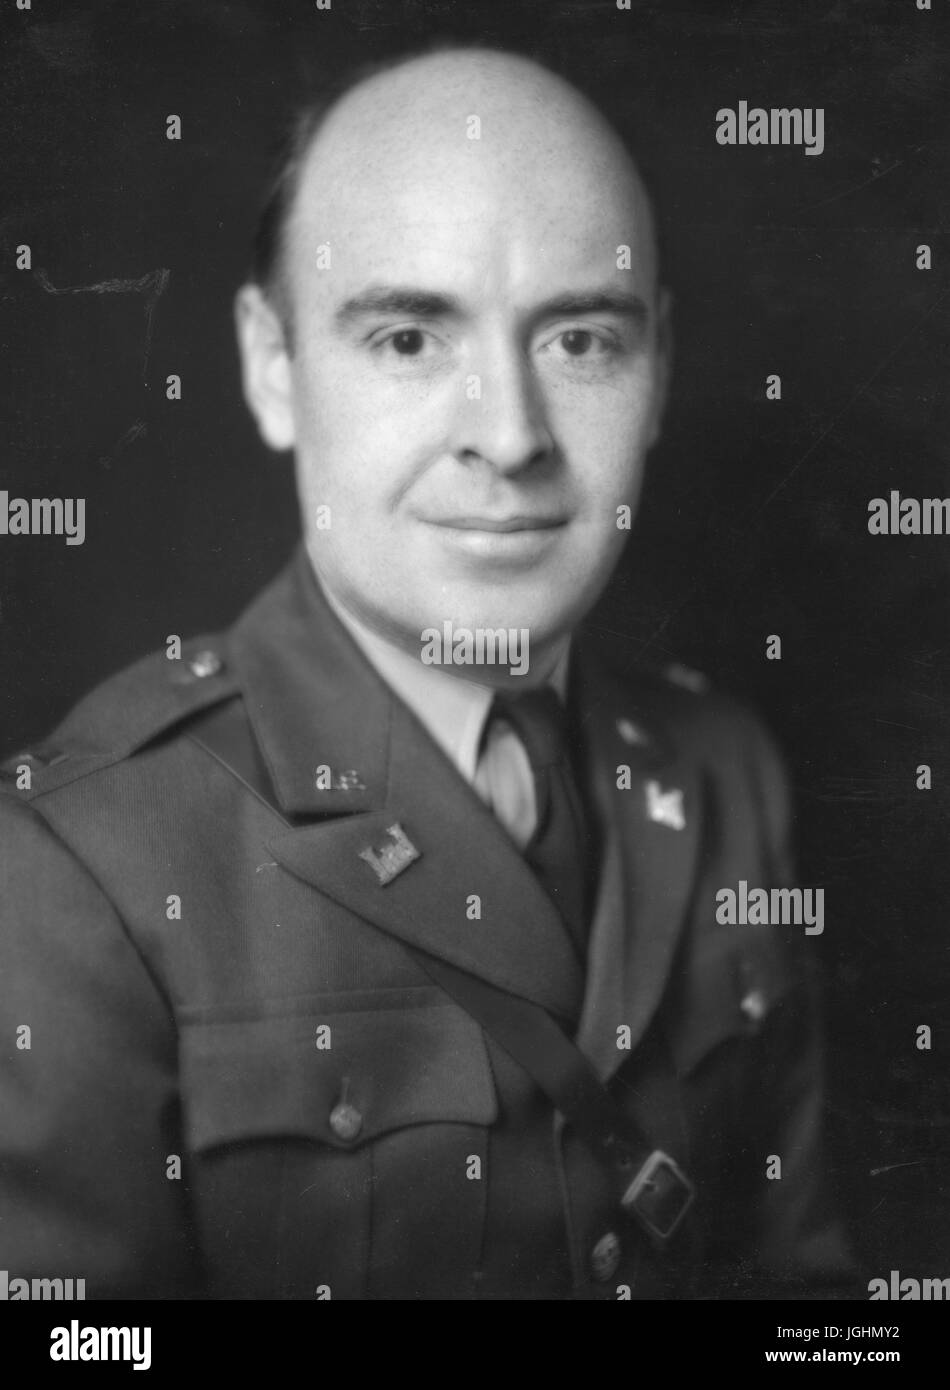 Portrait of Frank H. Forney, Colonel in the US Army's Engineering Corps, in uniform, 1940. Stock Photo